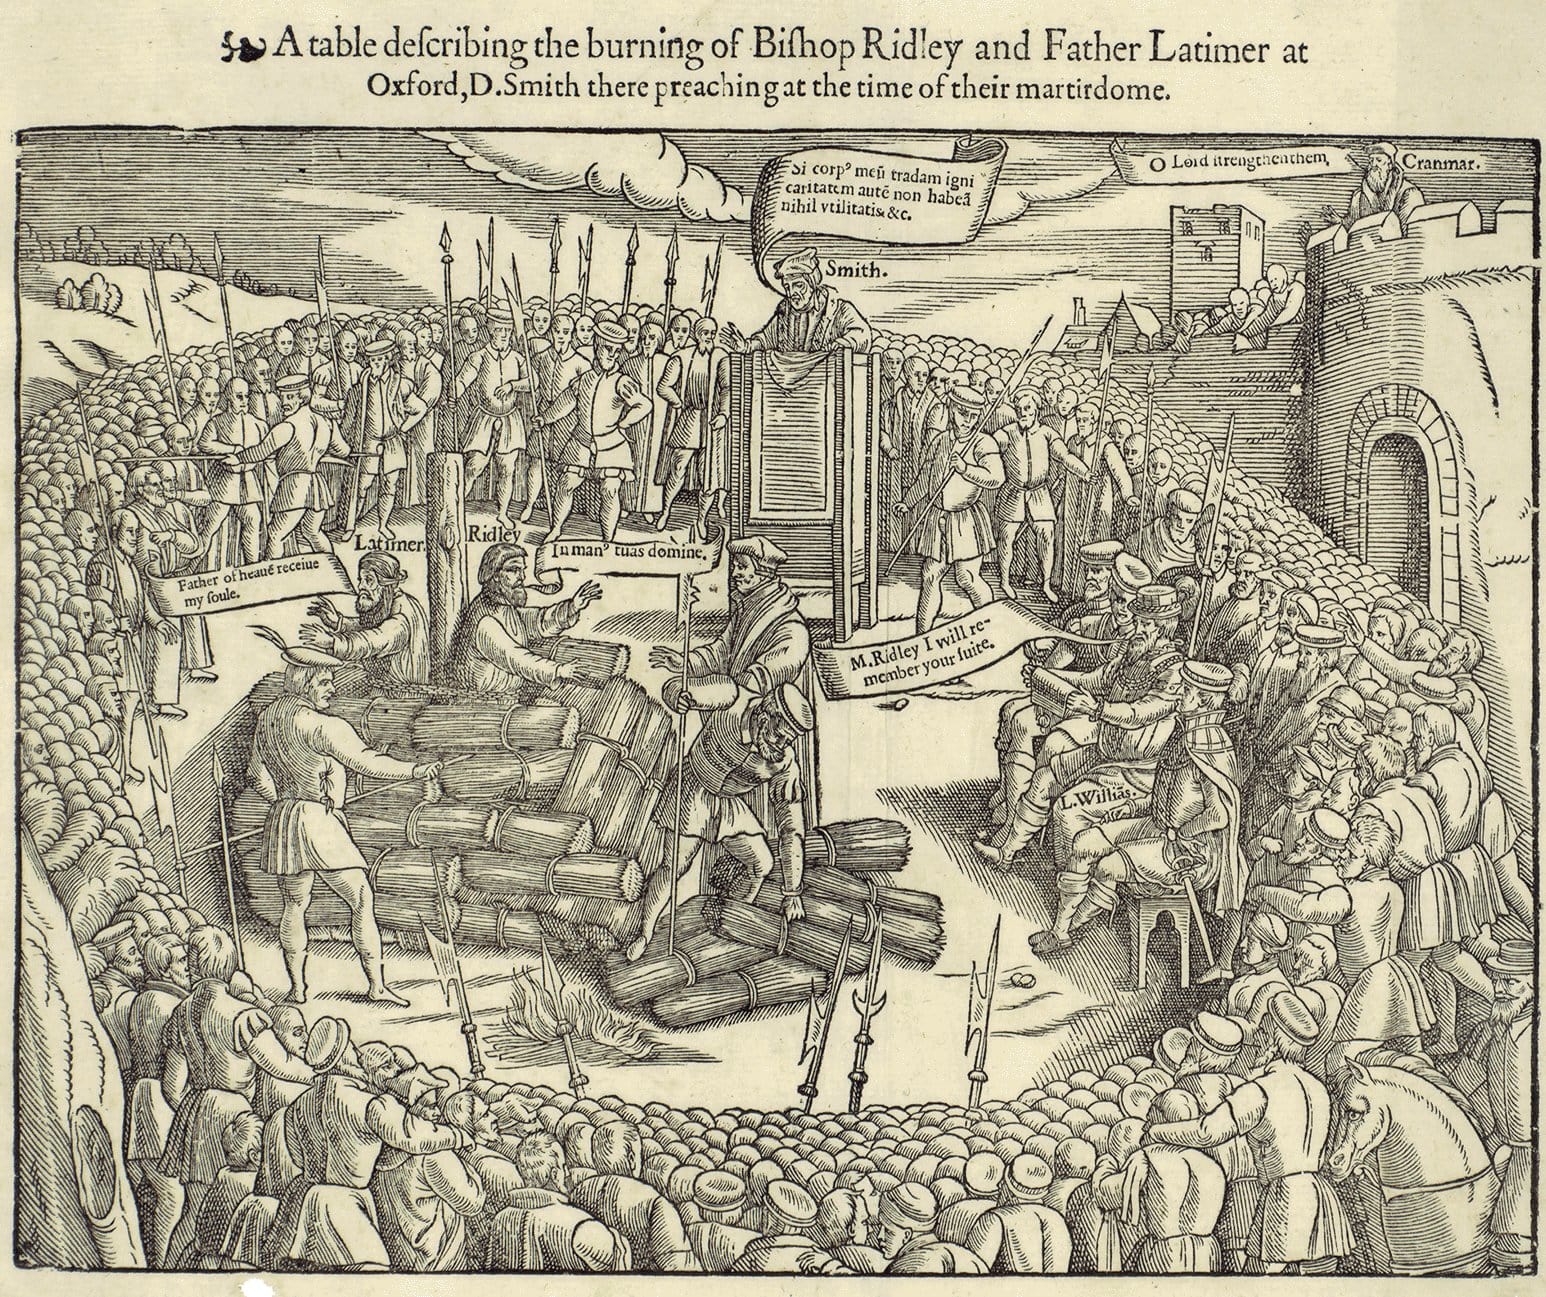 Protestant bishops Latimer and Ridley were burnt in 1555 as heretics during the reign of Mary I